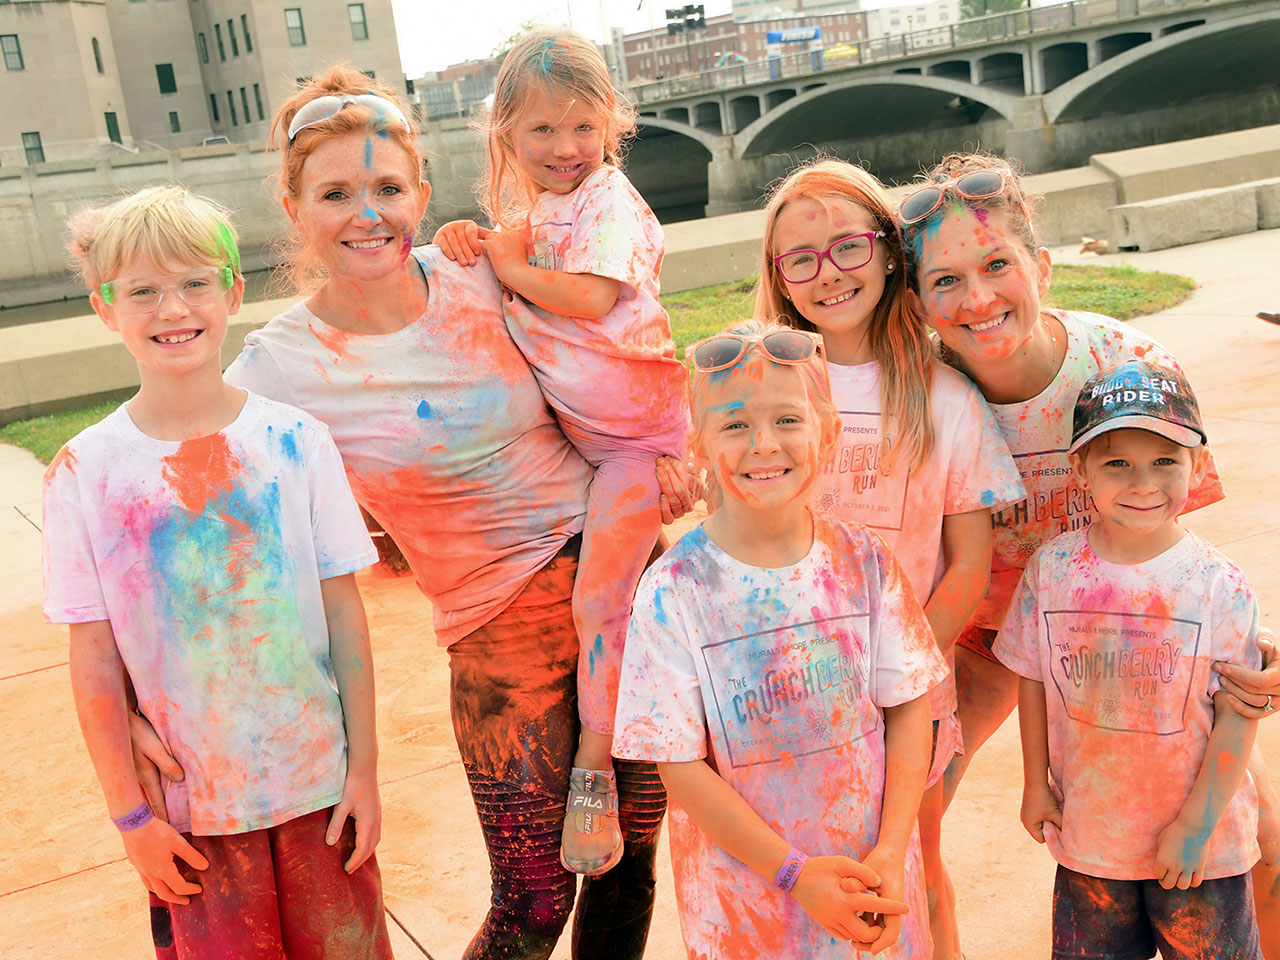 Cedar Rapids’ Most Colorful Event of the Year Returns This September